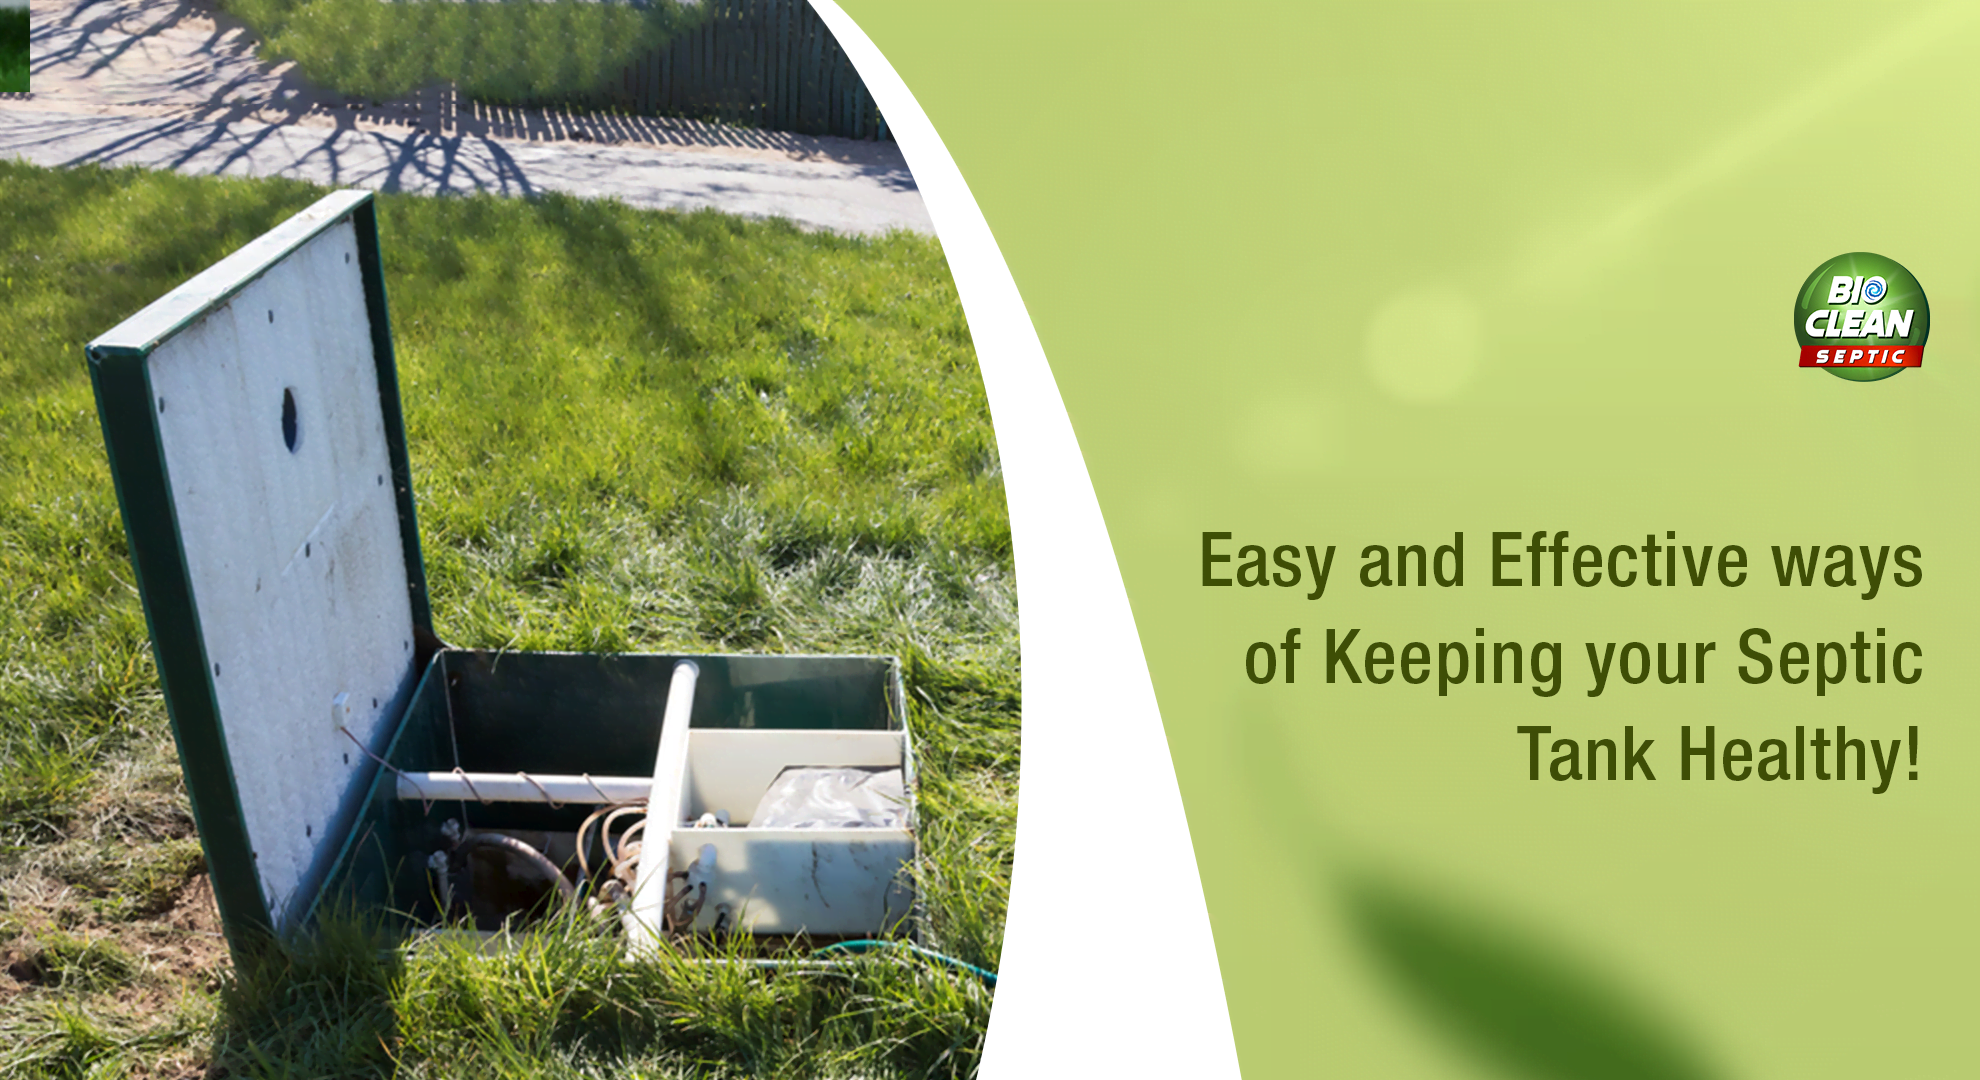 Easy and Effective ways of Keeping your Septic Tank Healthy!